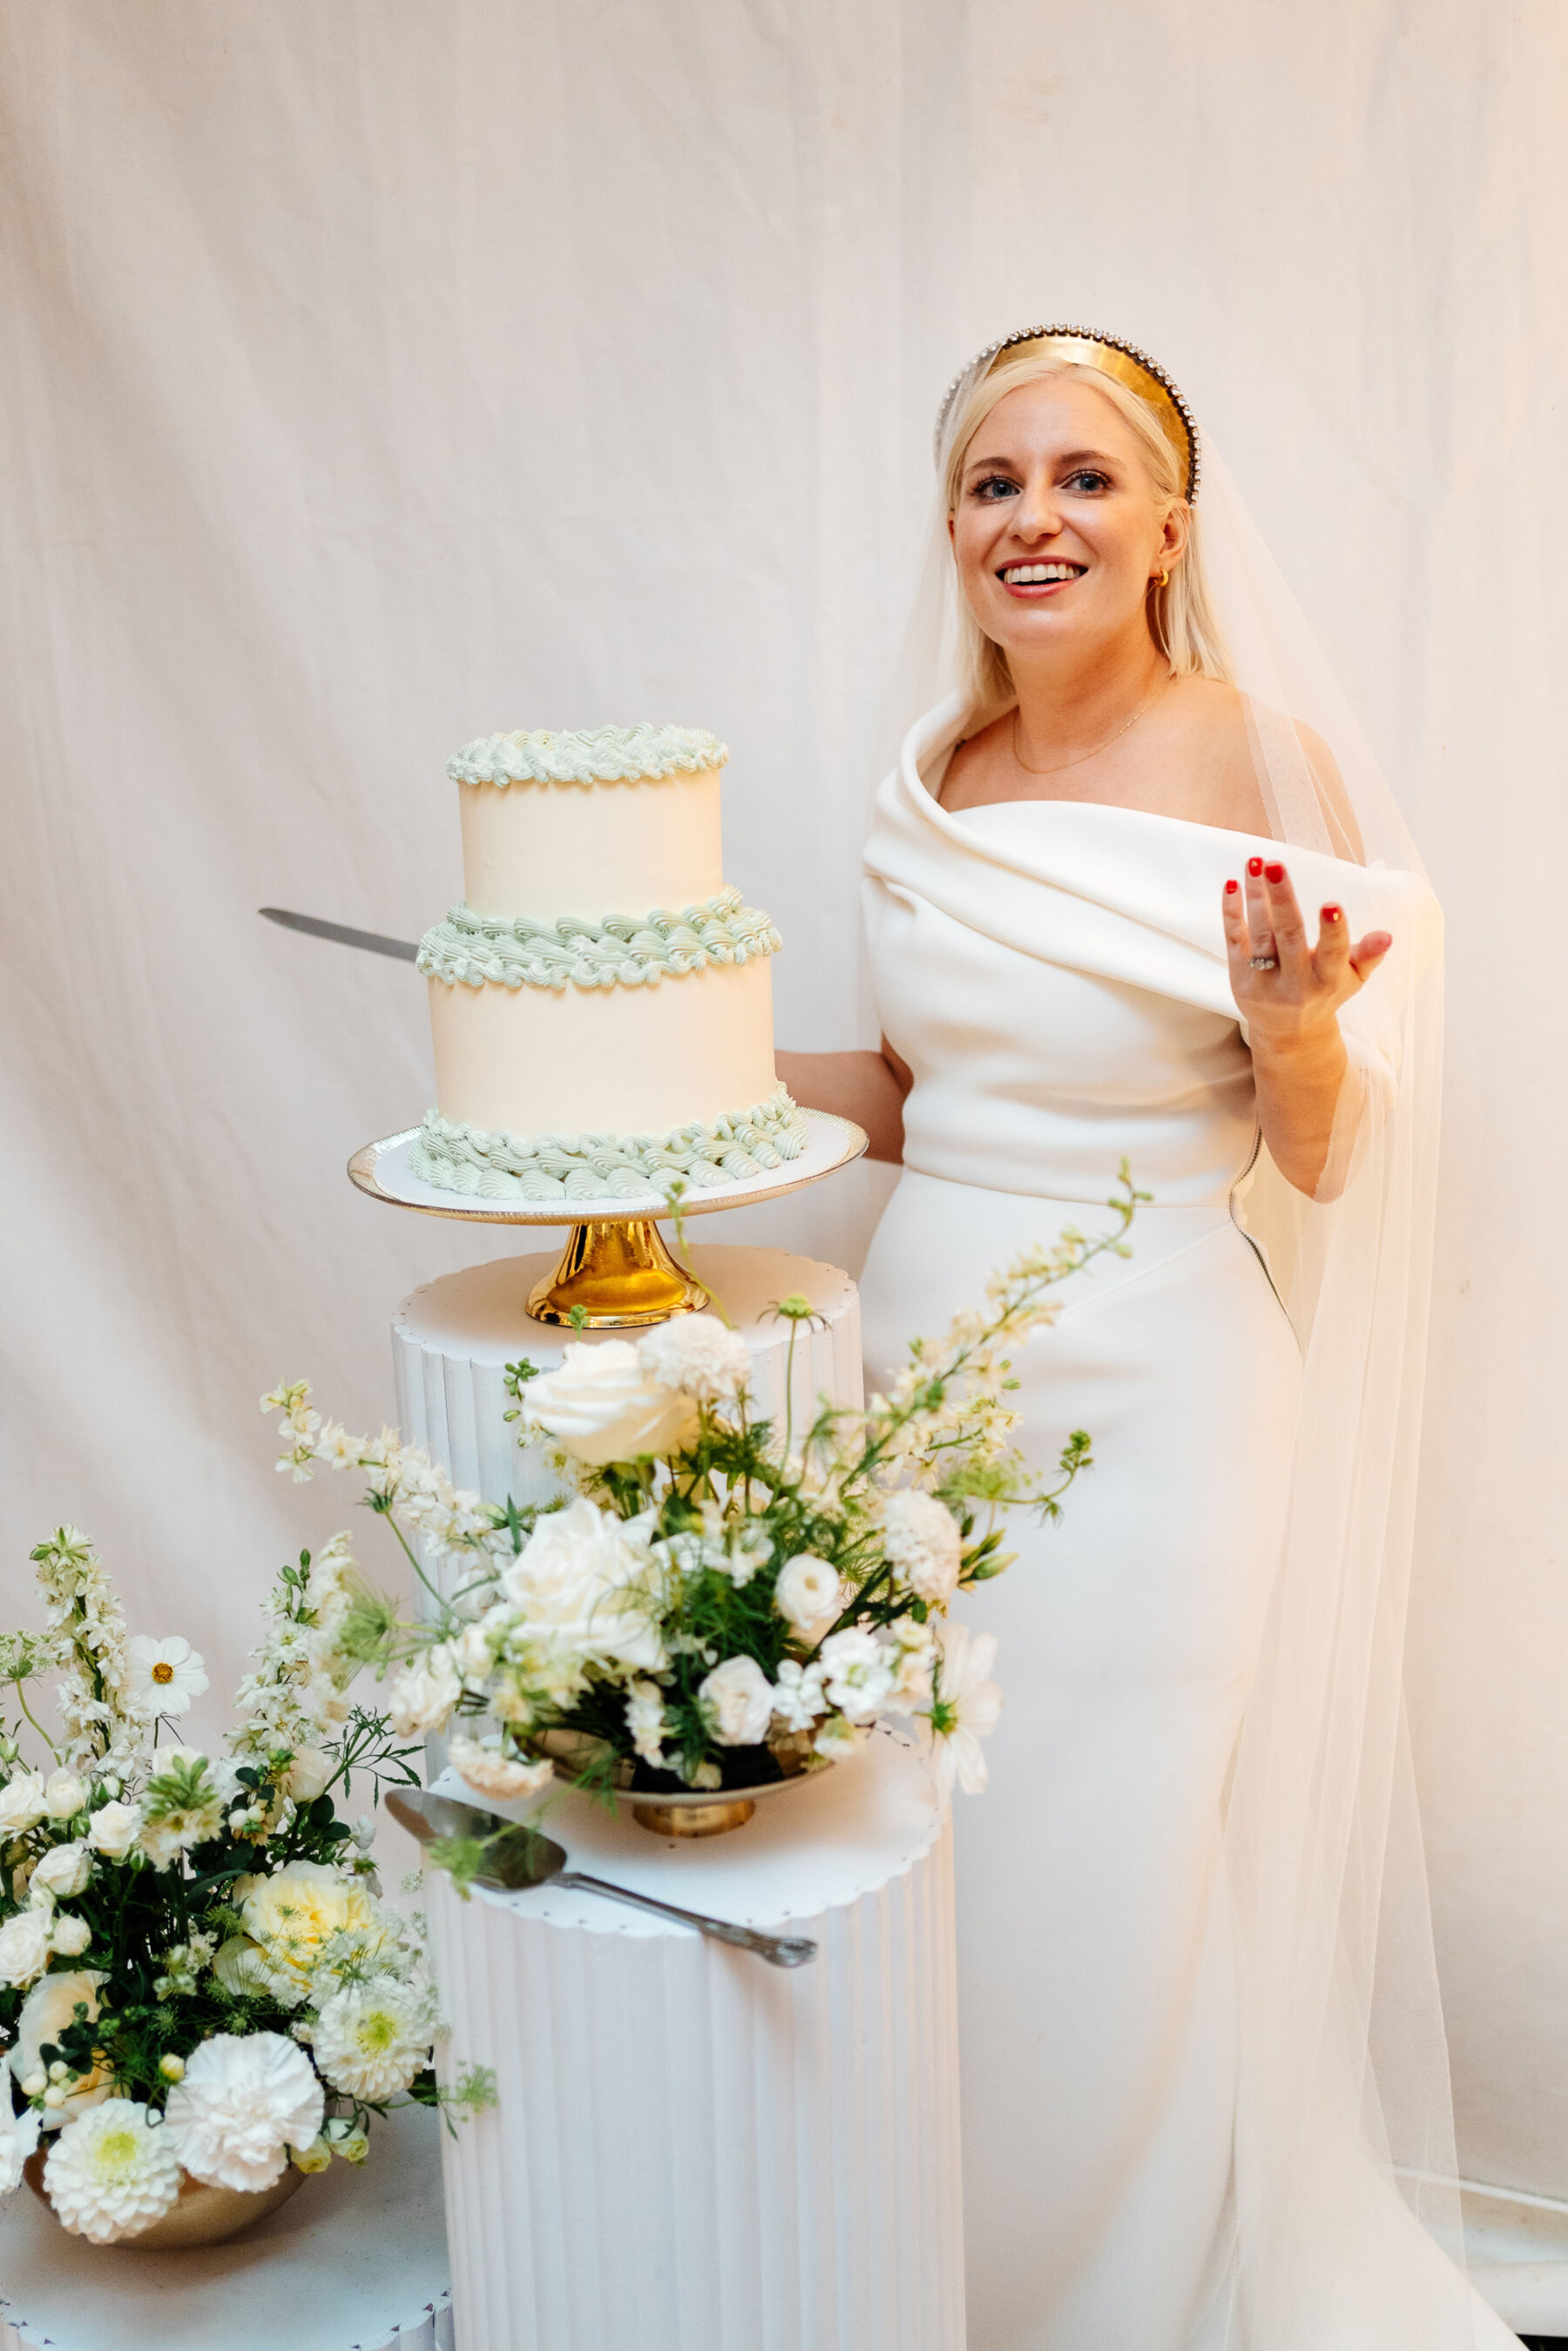 Modern bride in a Toni Maticevski wedding dress holding a knife to cut her simple two tier wedding cake which has pale green frilly icing around the base.